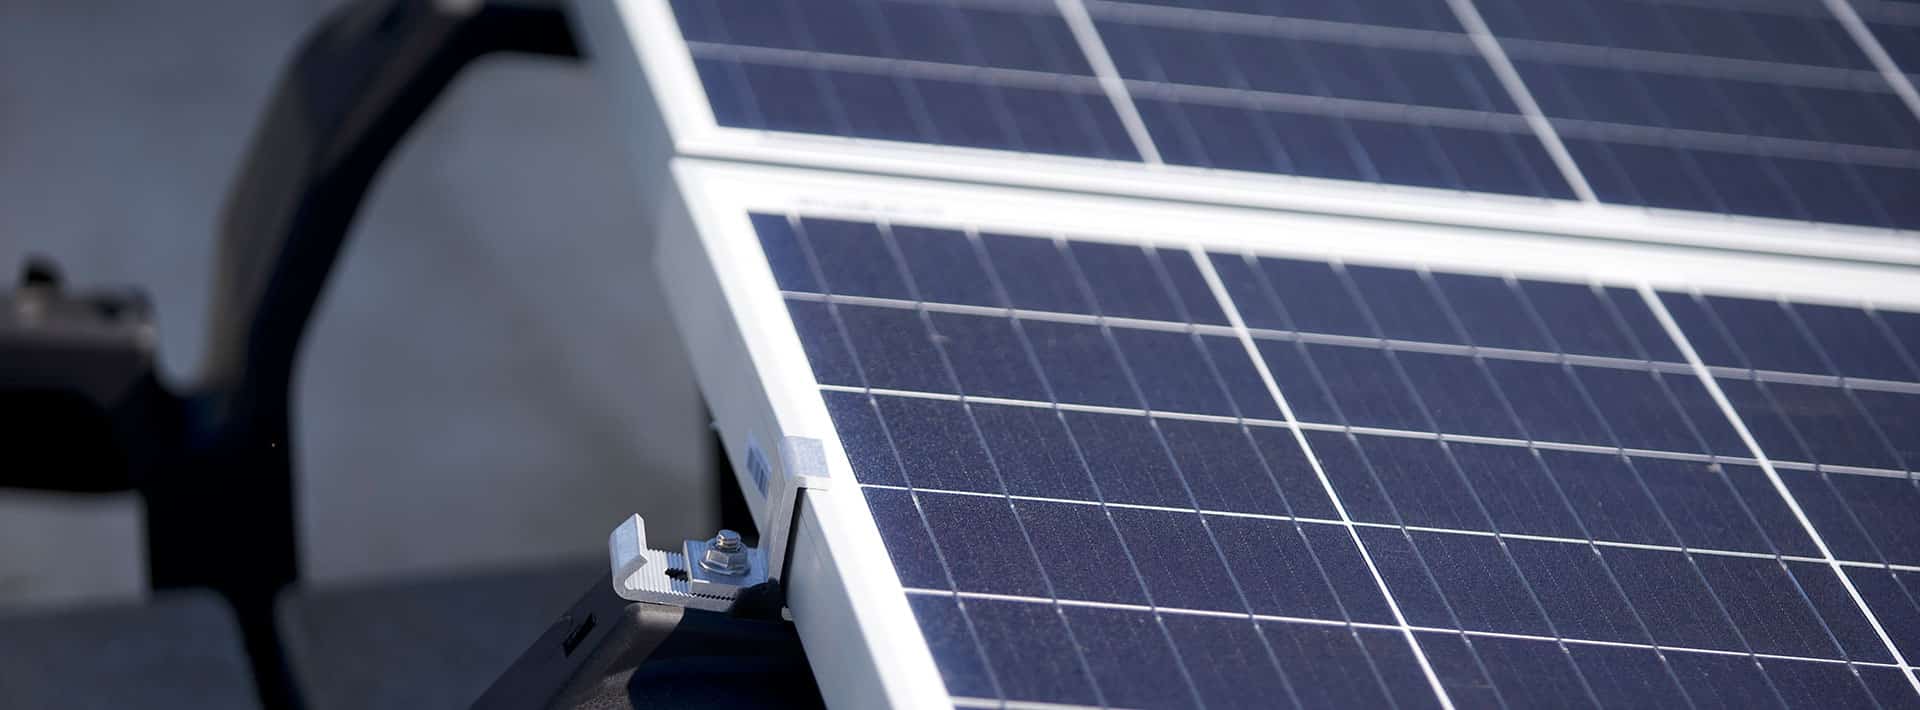 close up angle of solar panel with mounting bracket